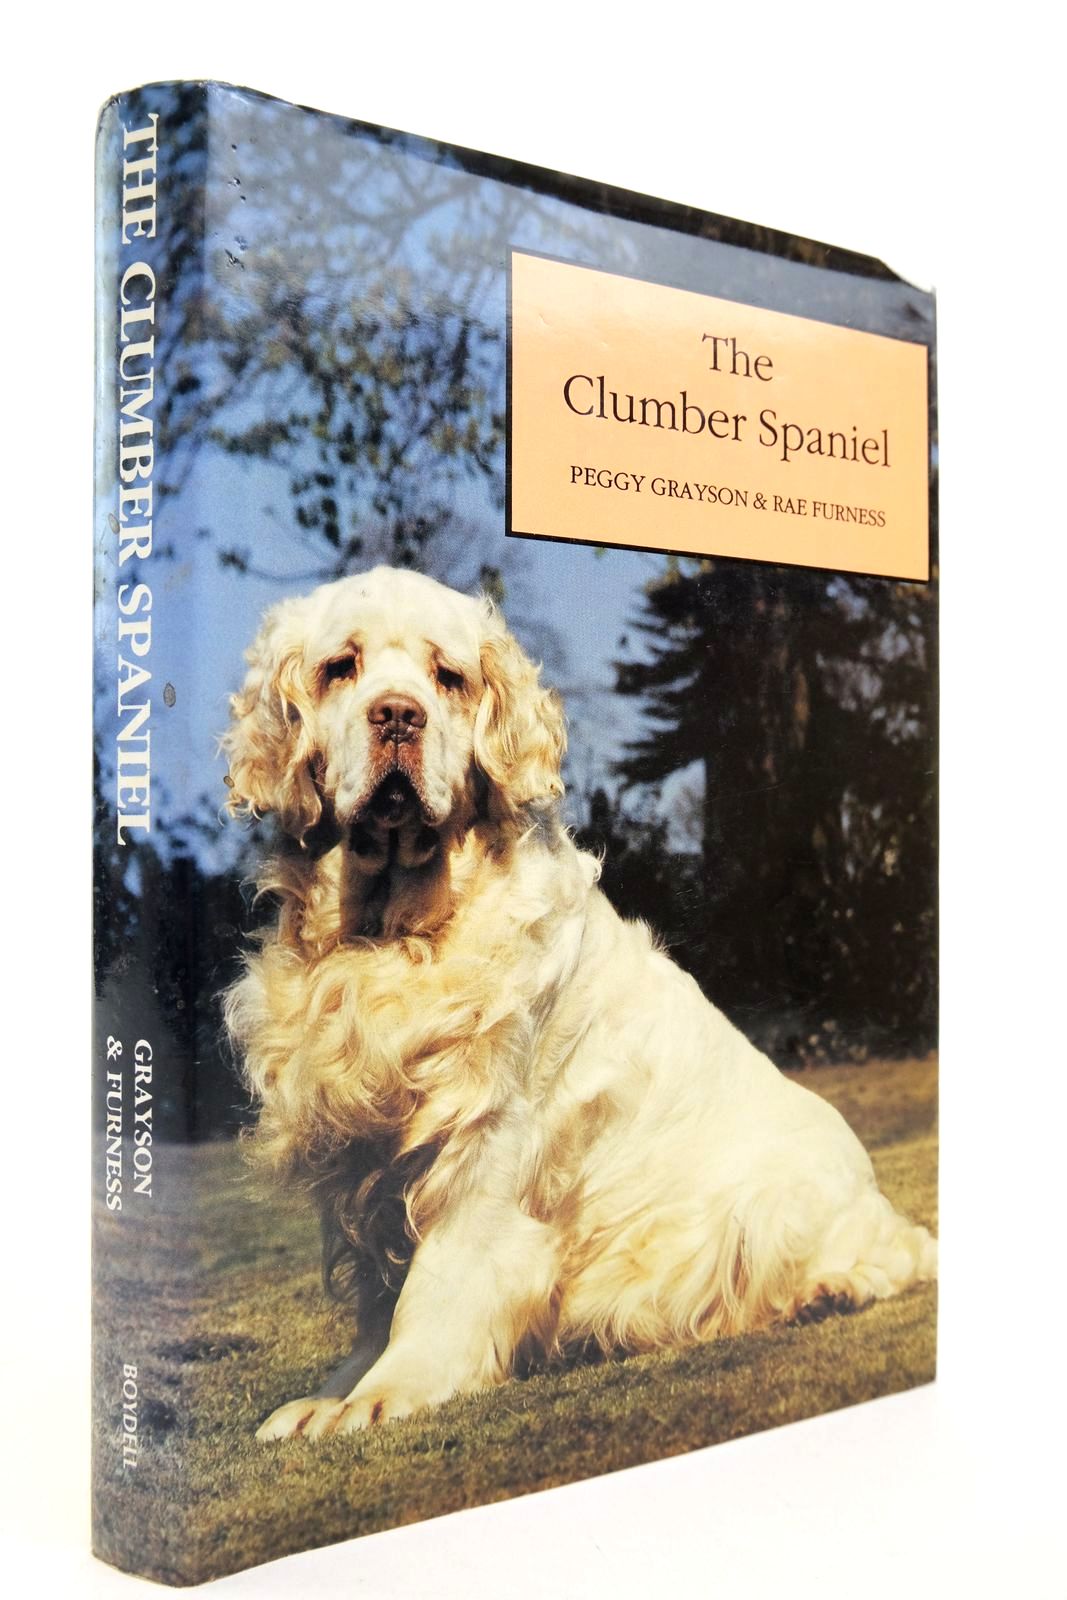 Photo of THE CLUMBER SPANIEL written by Grayson, Peggy Furness, Rae published by The Boydell Press (STOCK CODE: 2139616)  for sale by Stella & Rose's Books